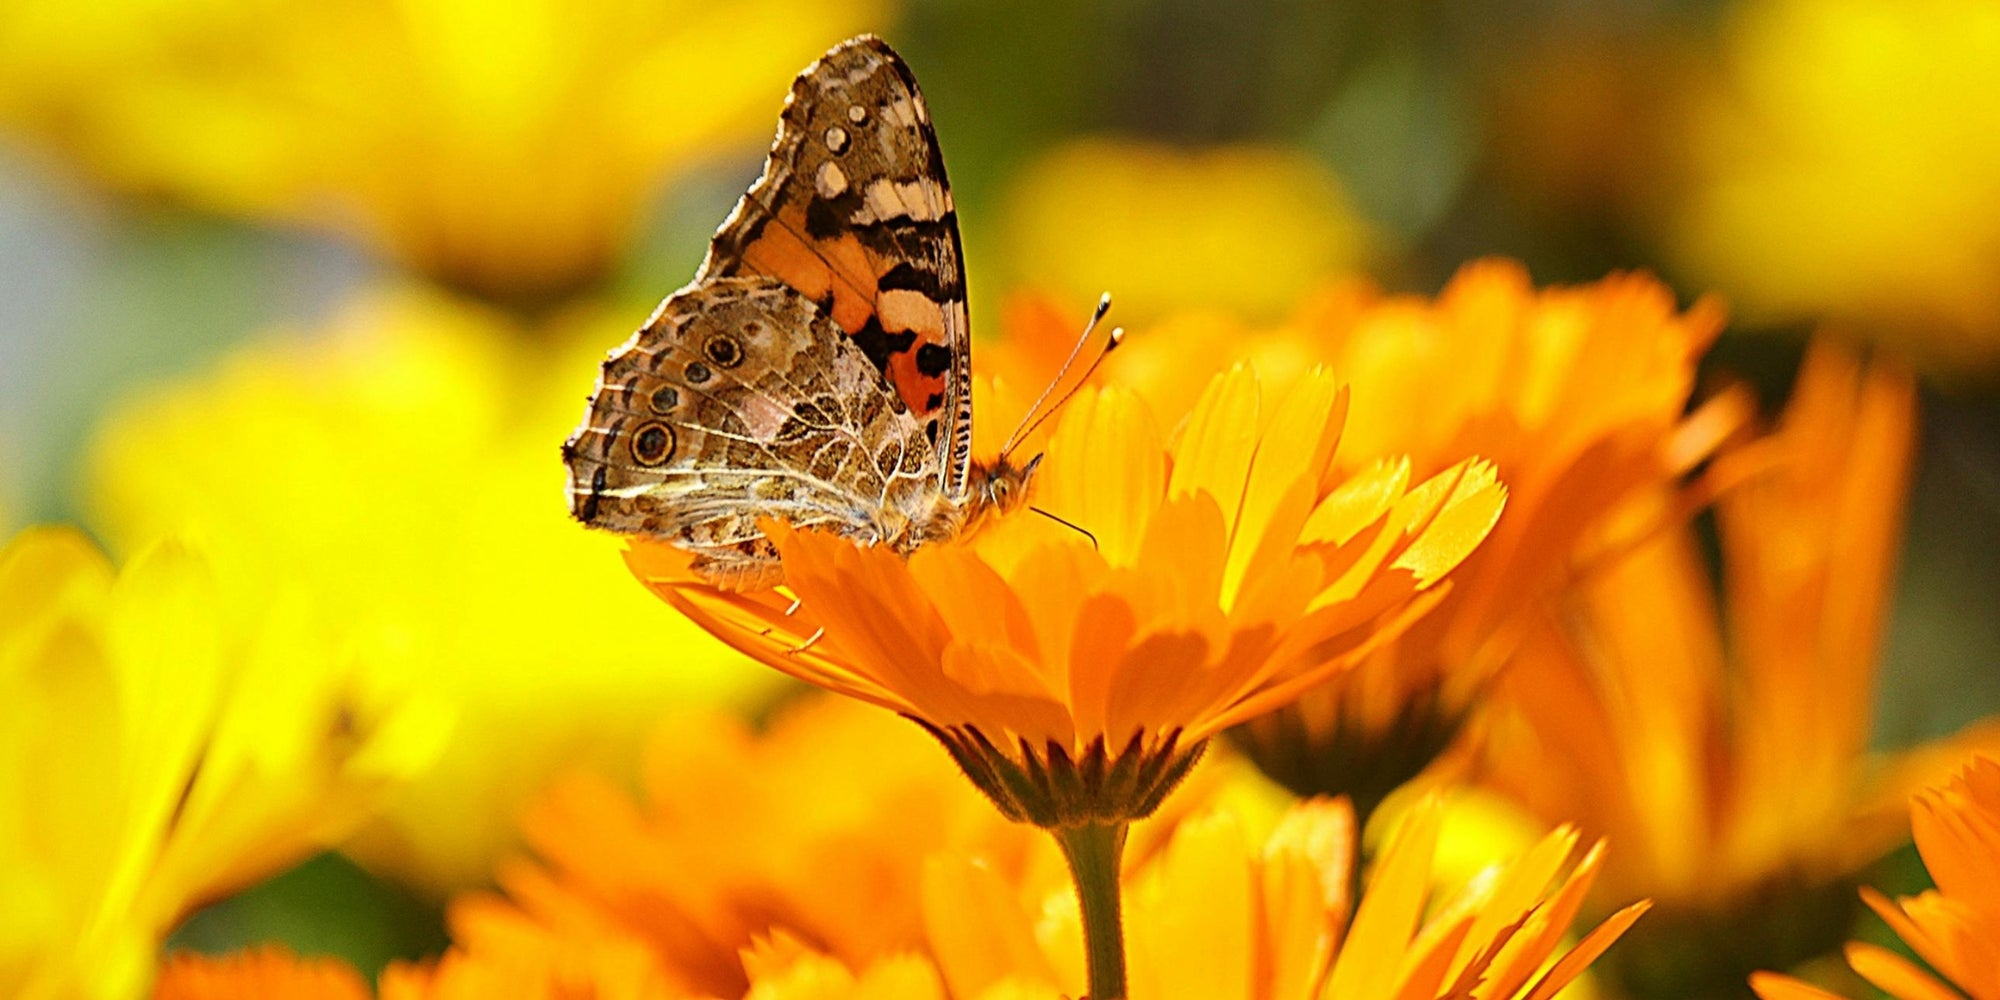 Exploring Calendula for Skin Care and Wound Healing